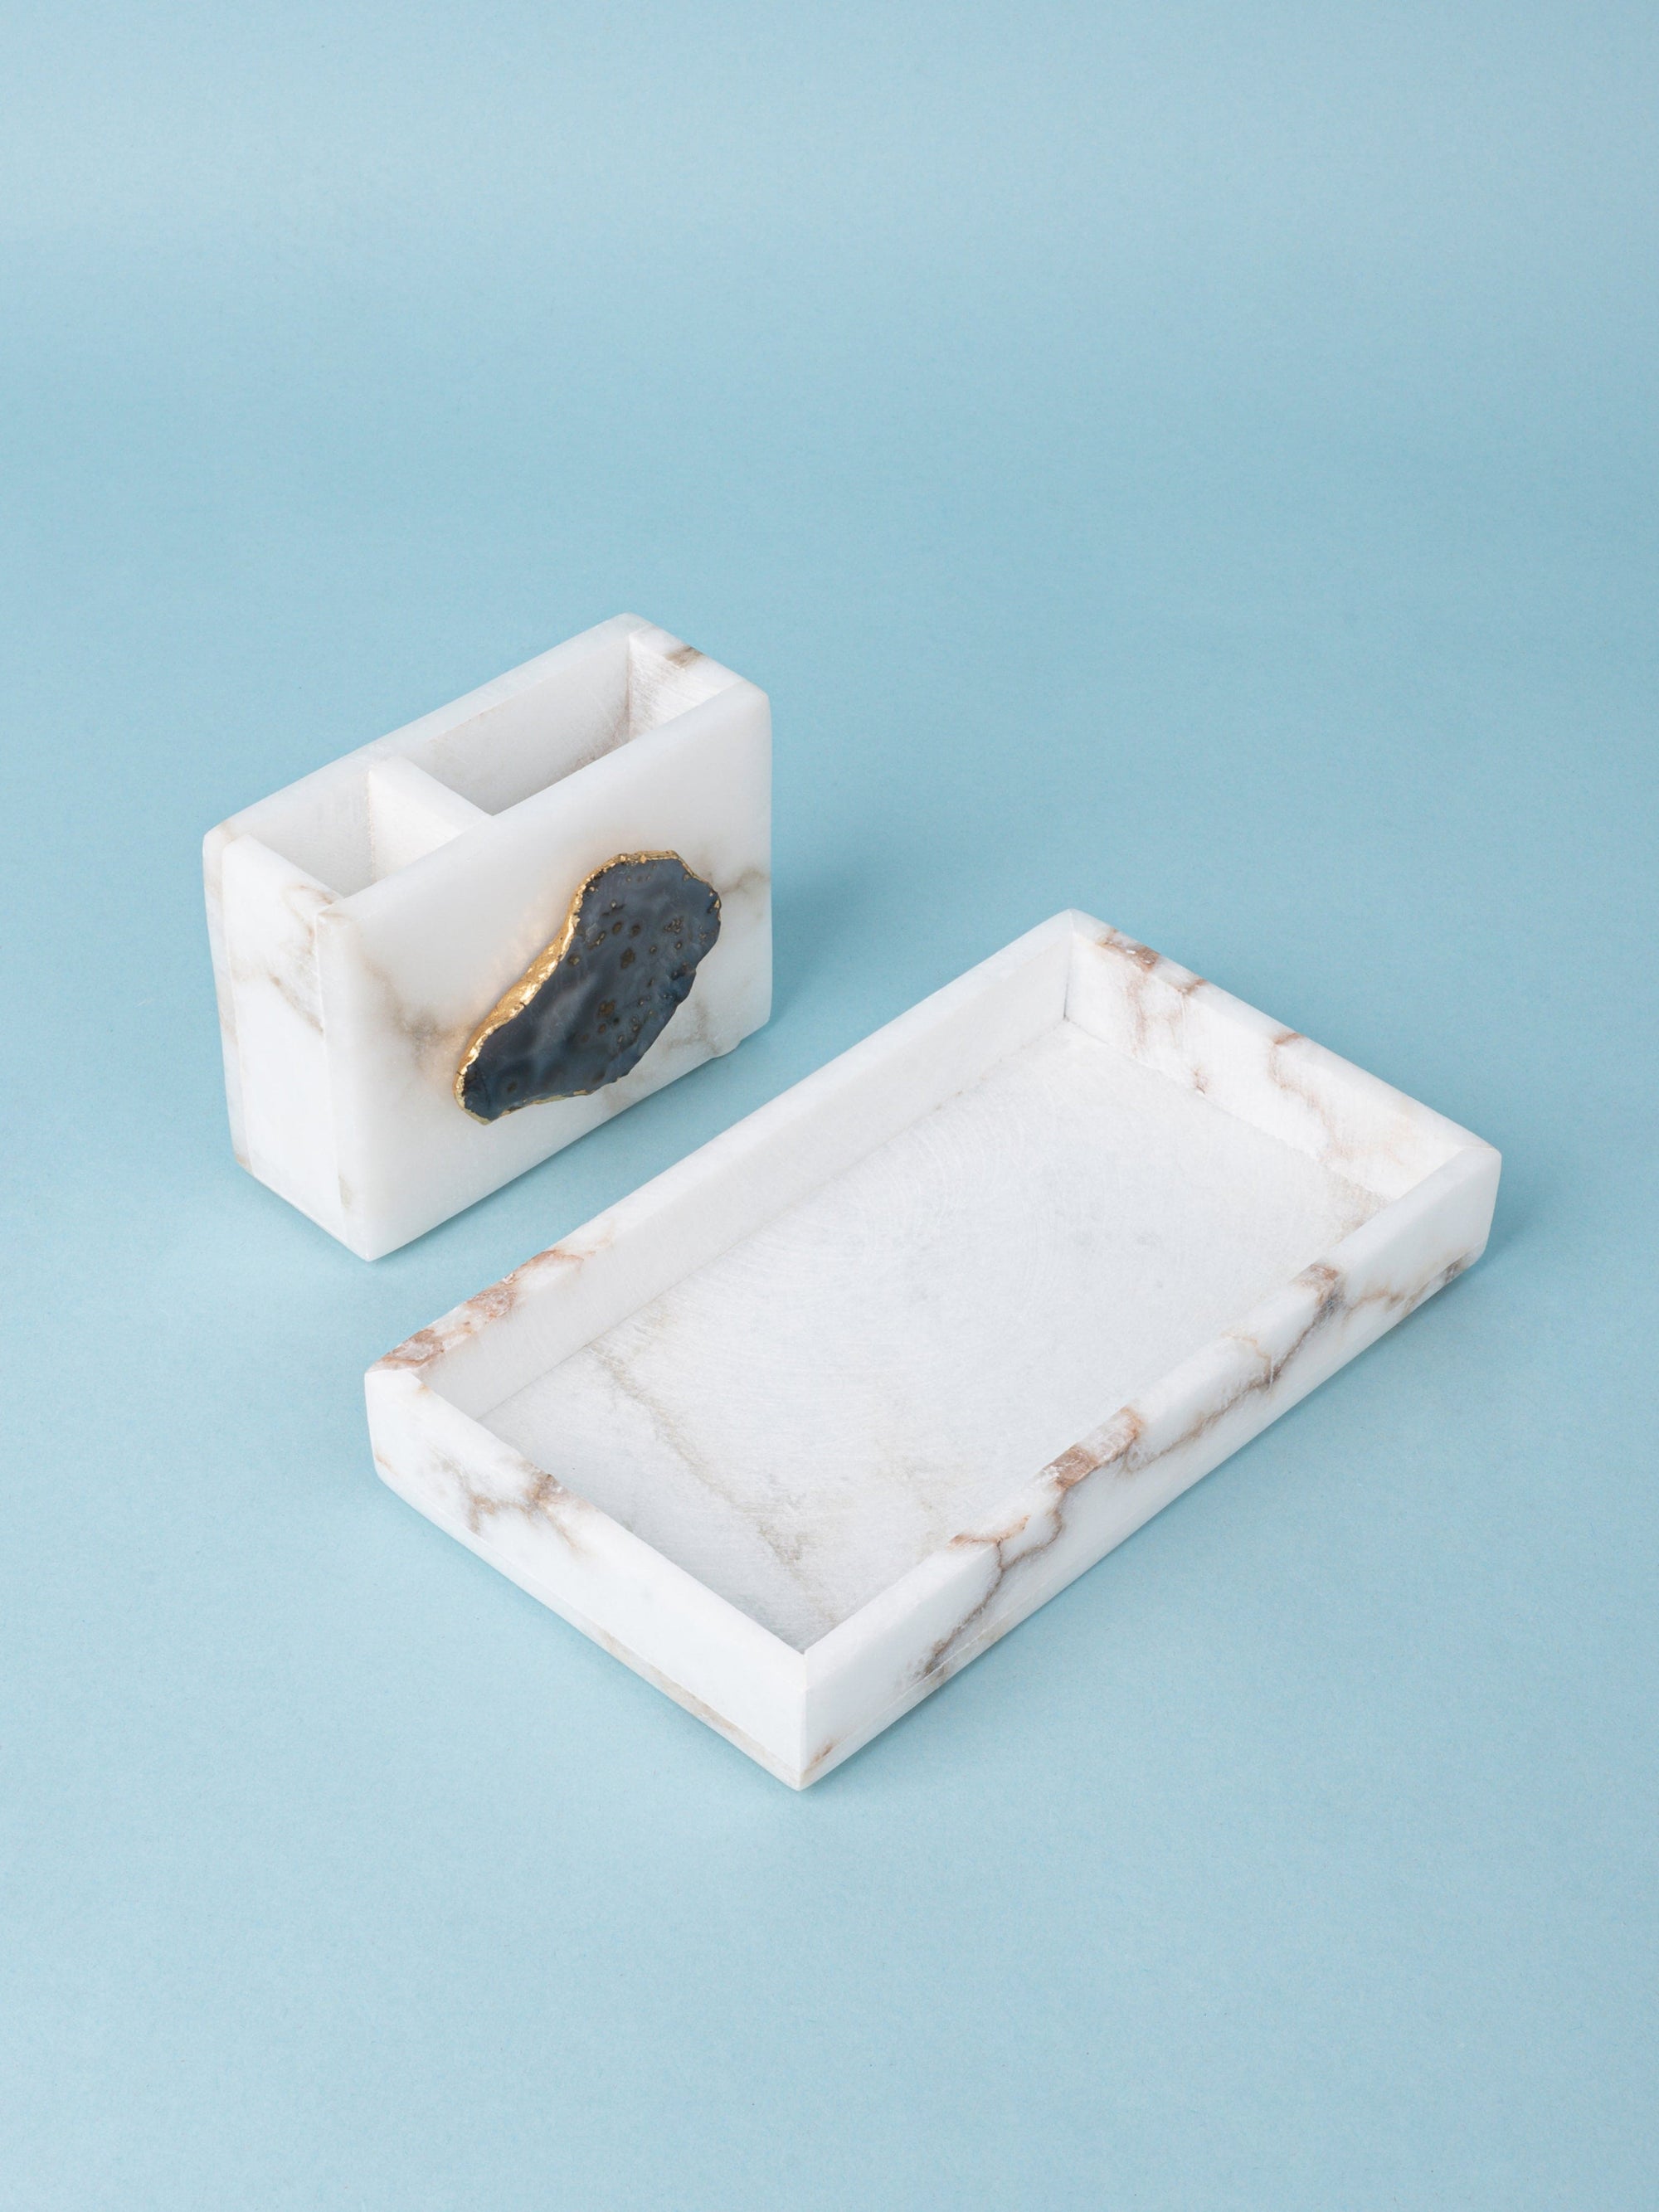 2 Sectional Pen Stand with Agate Stone Design on a Rectangular Tray - Office Organiser